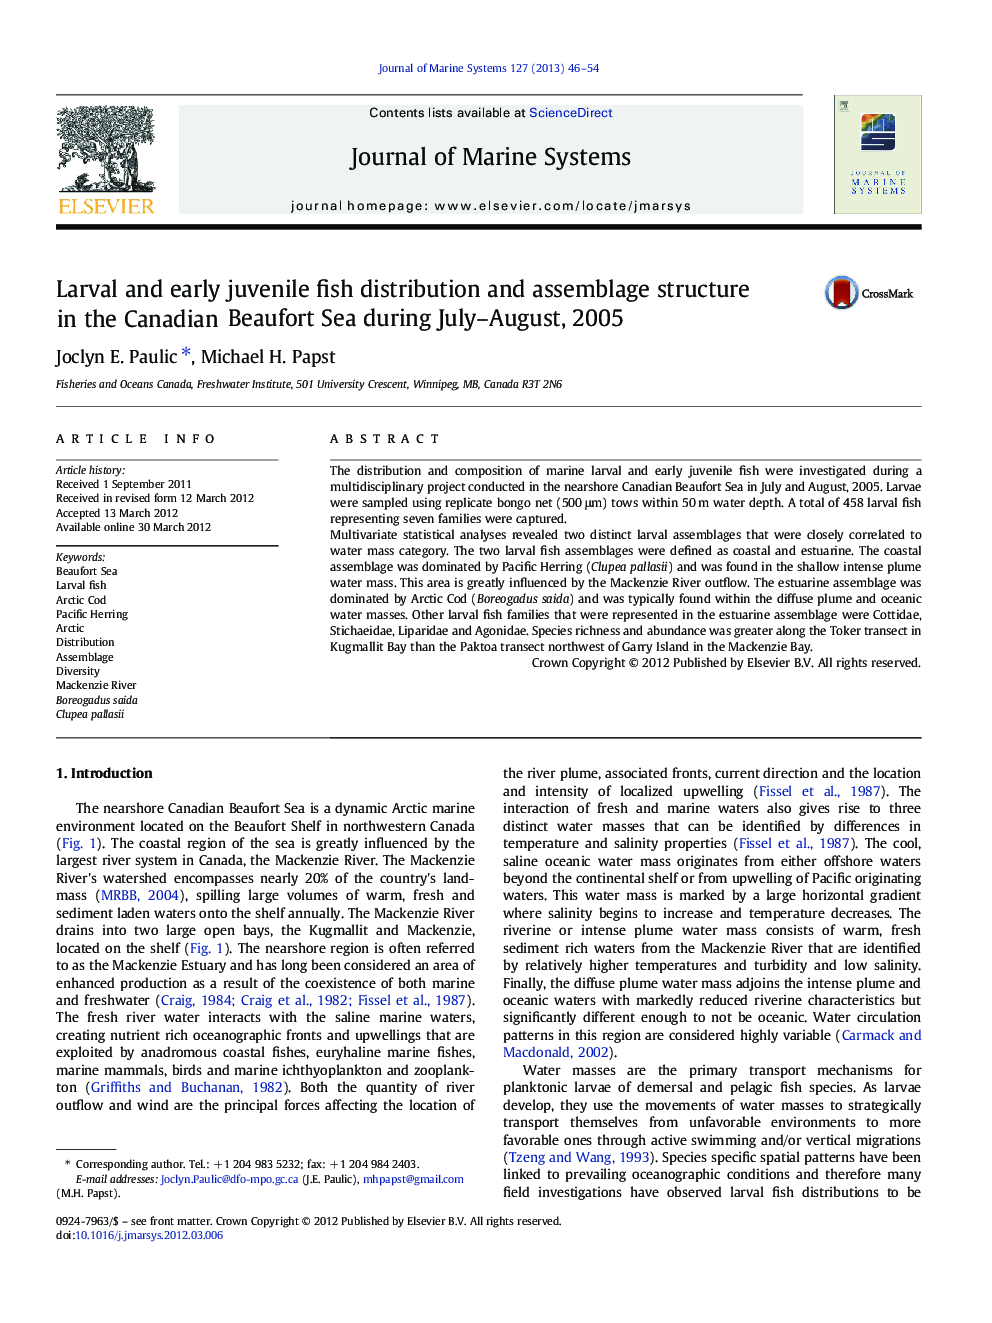 Larval and early juvenile fish distribution and assemblage structure in the Canadian Beaufort Sea during July-August, 2005